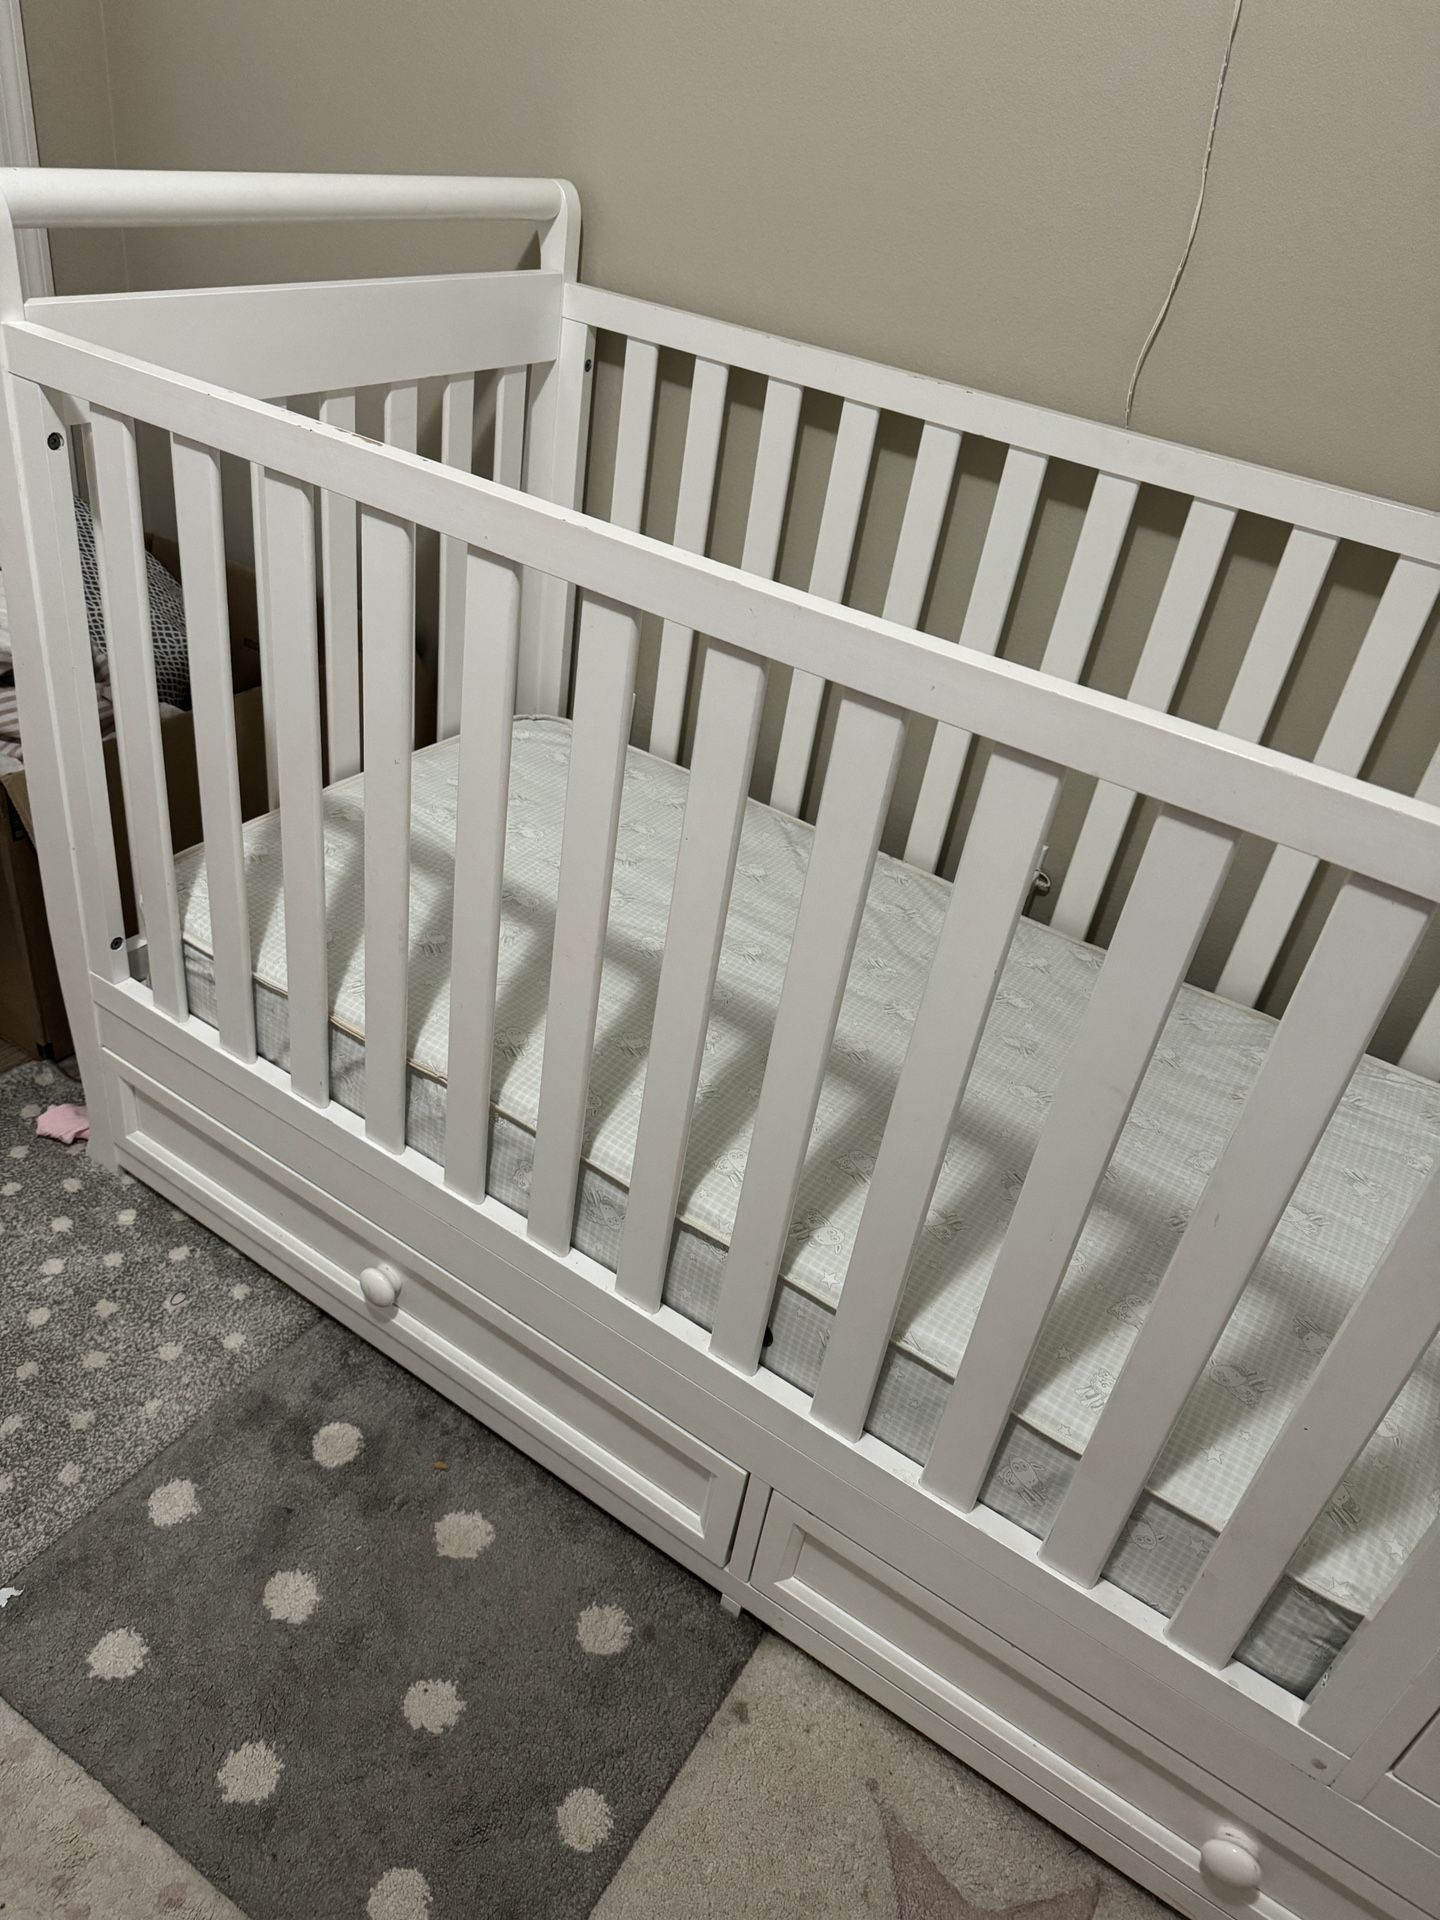 White crib with Changing Table & Drawers Attached